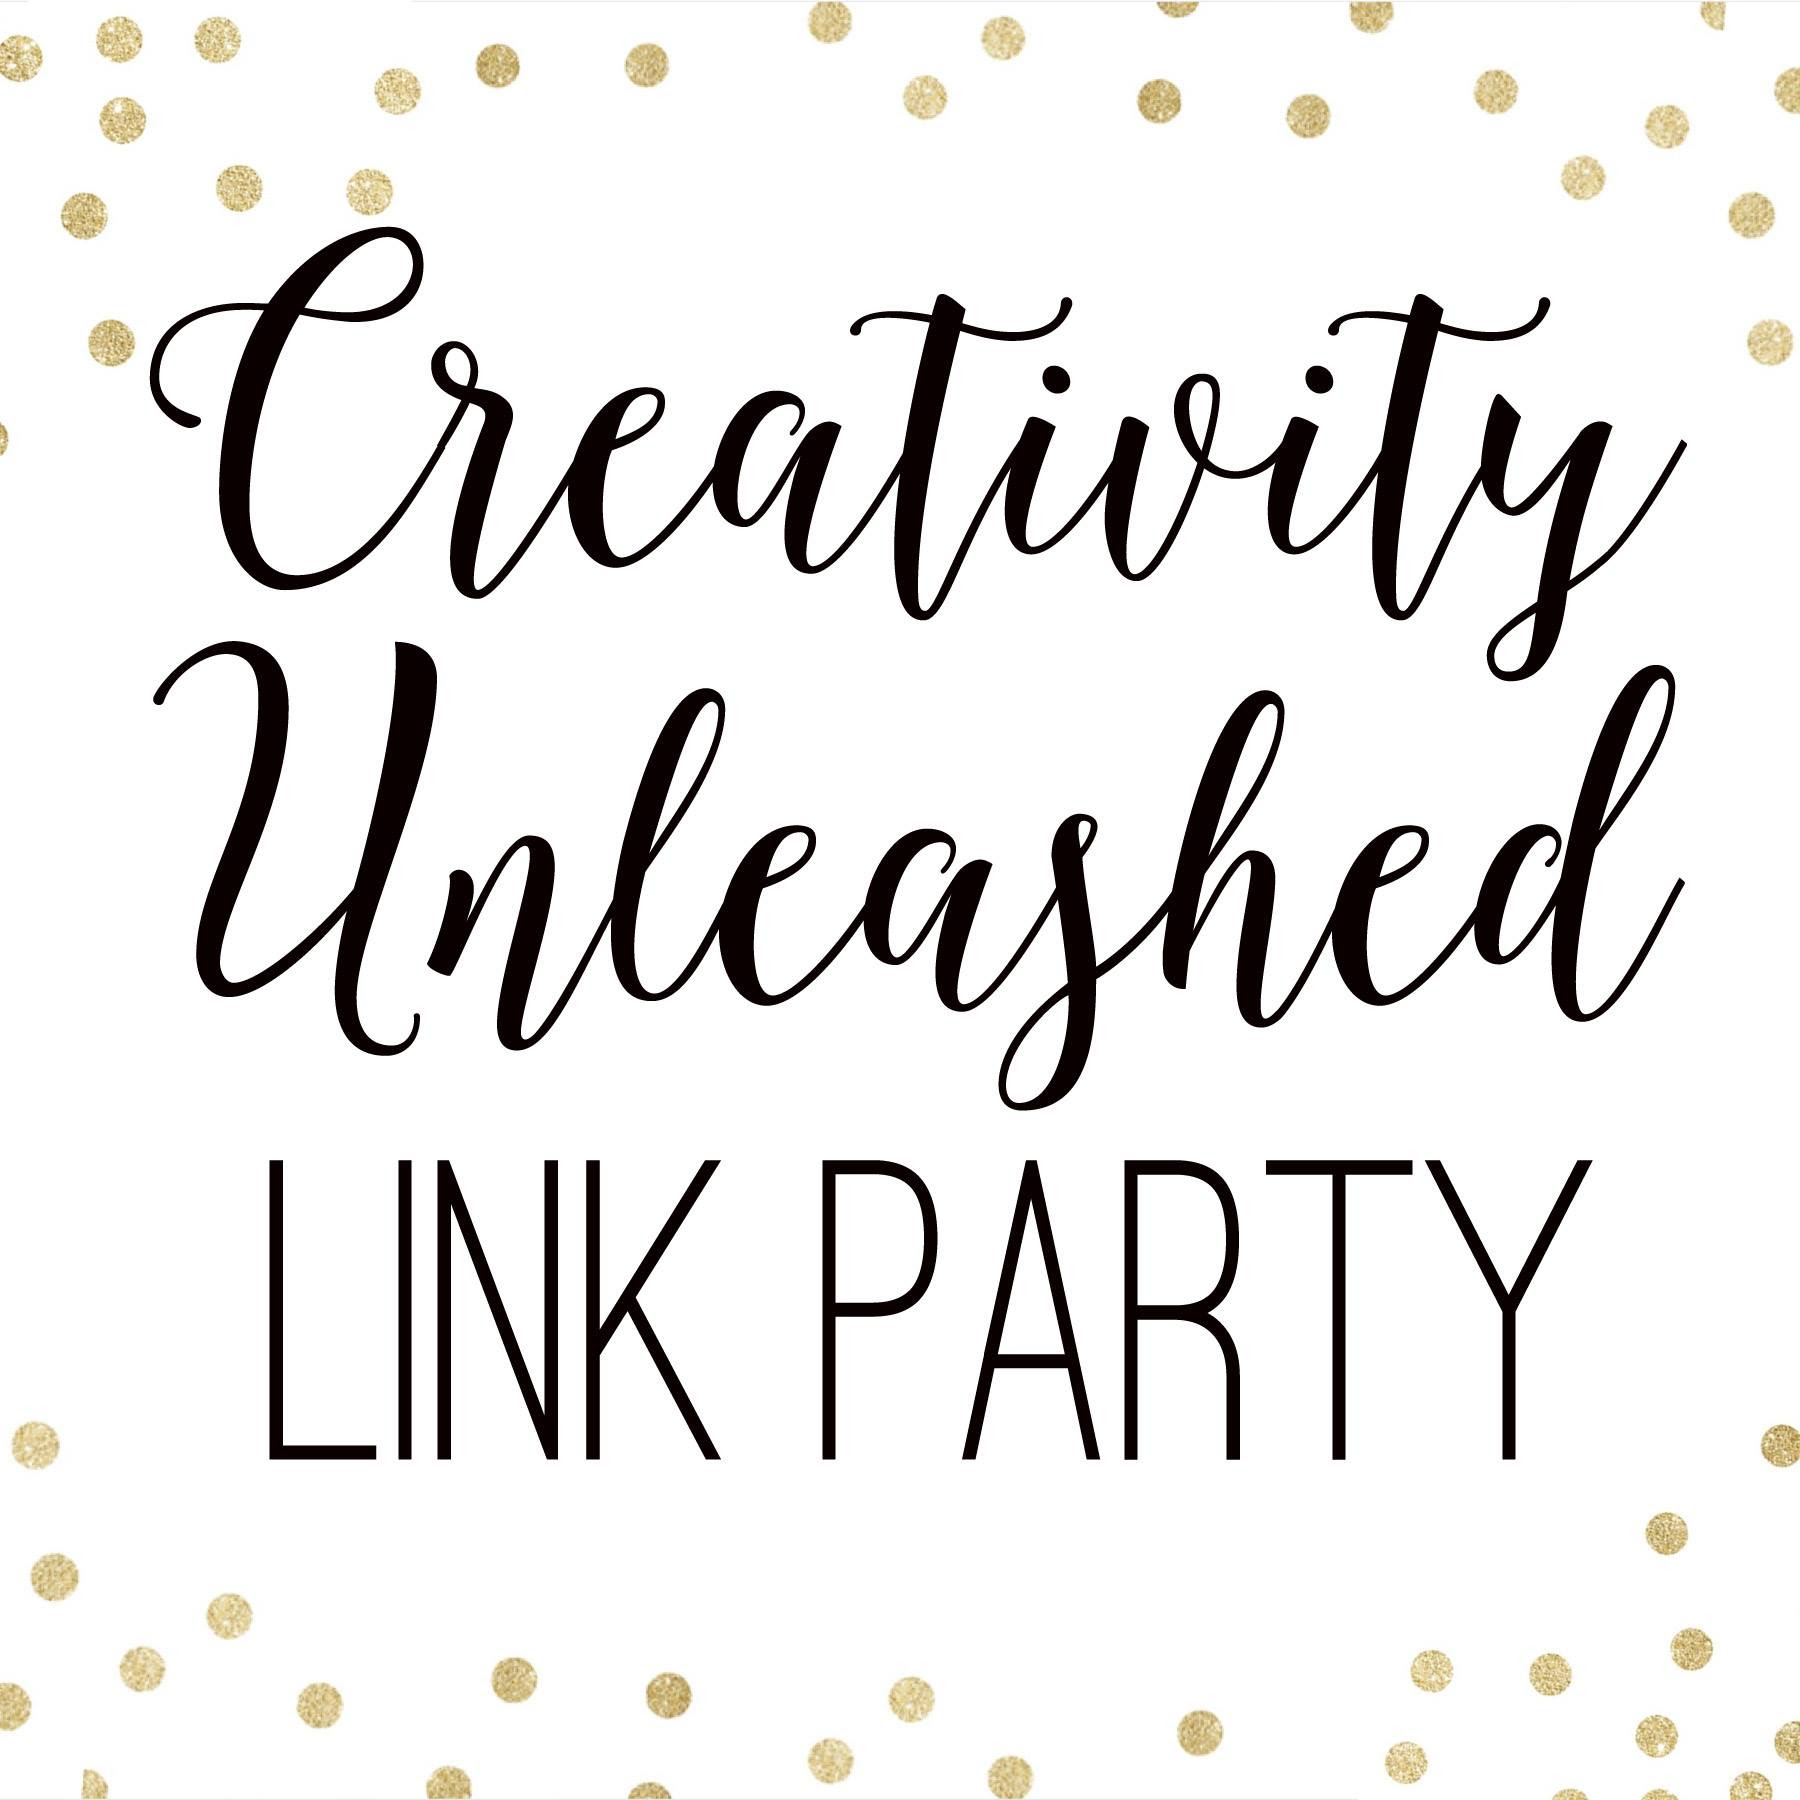 Creativity Unleashed link party every Thursday at 7pm ET!